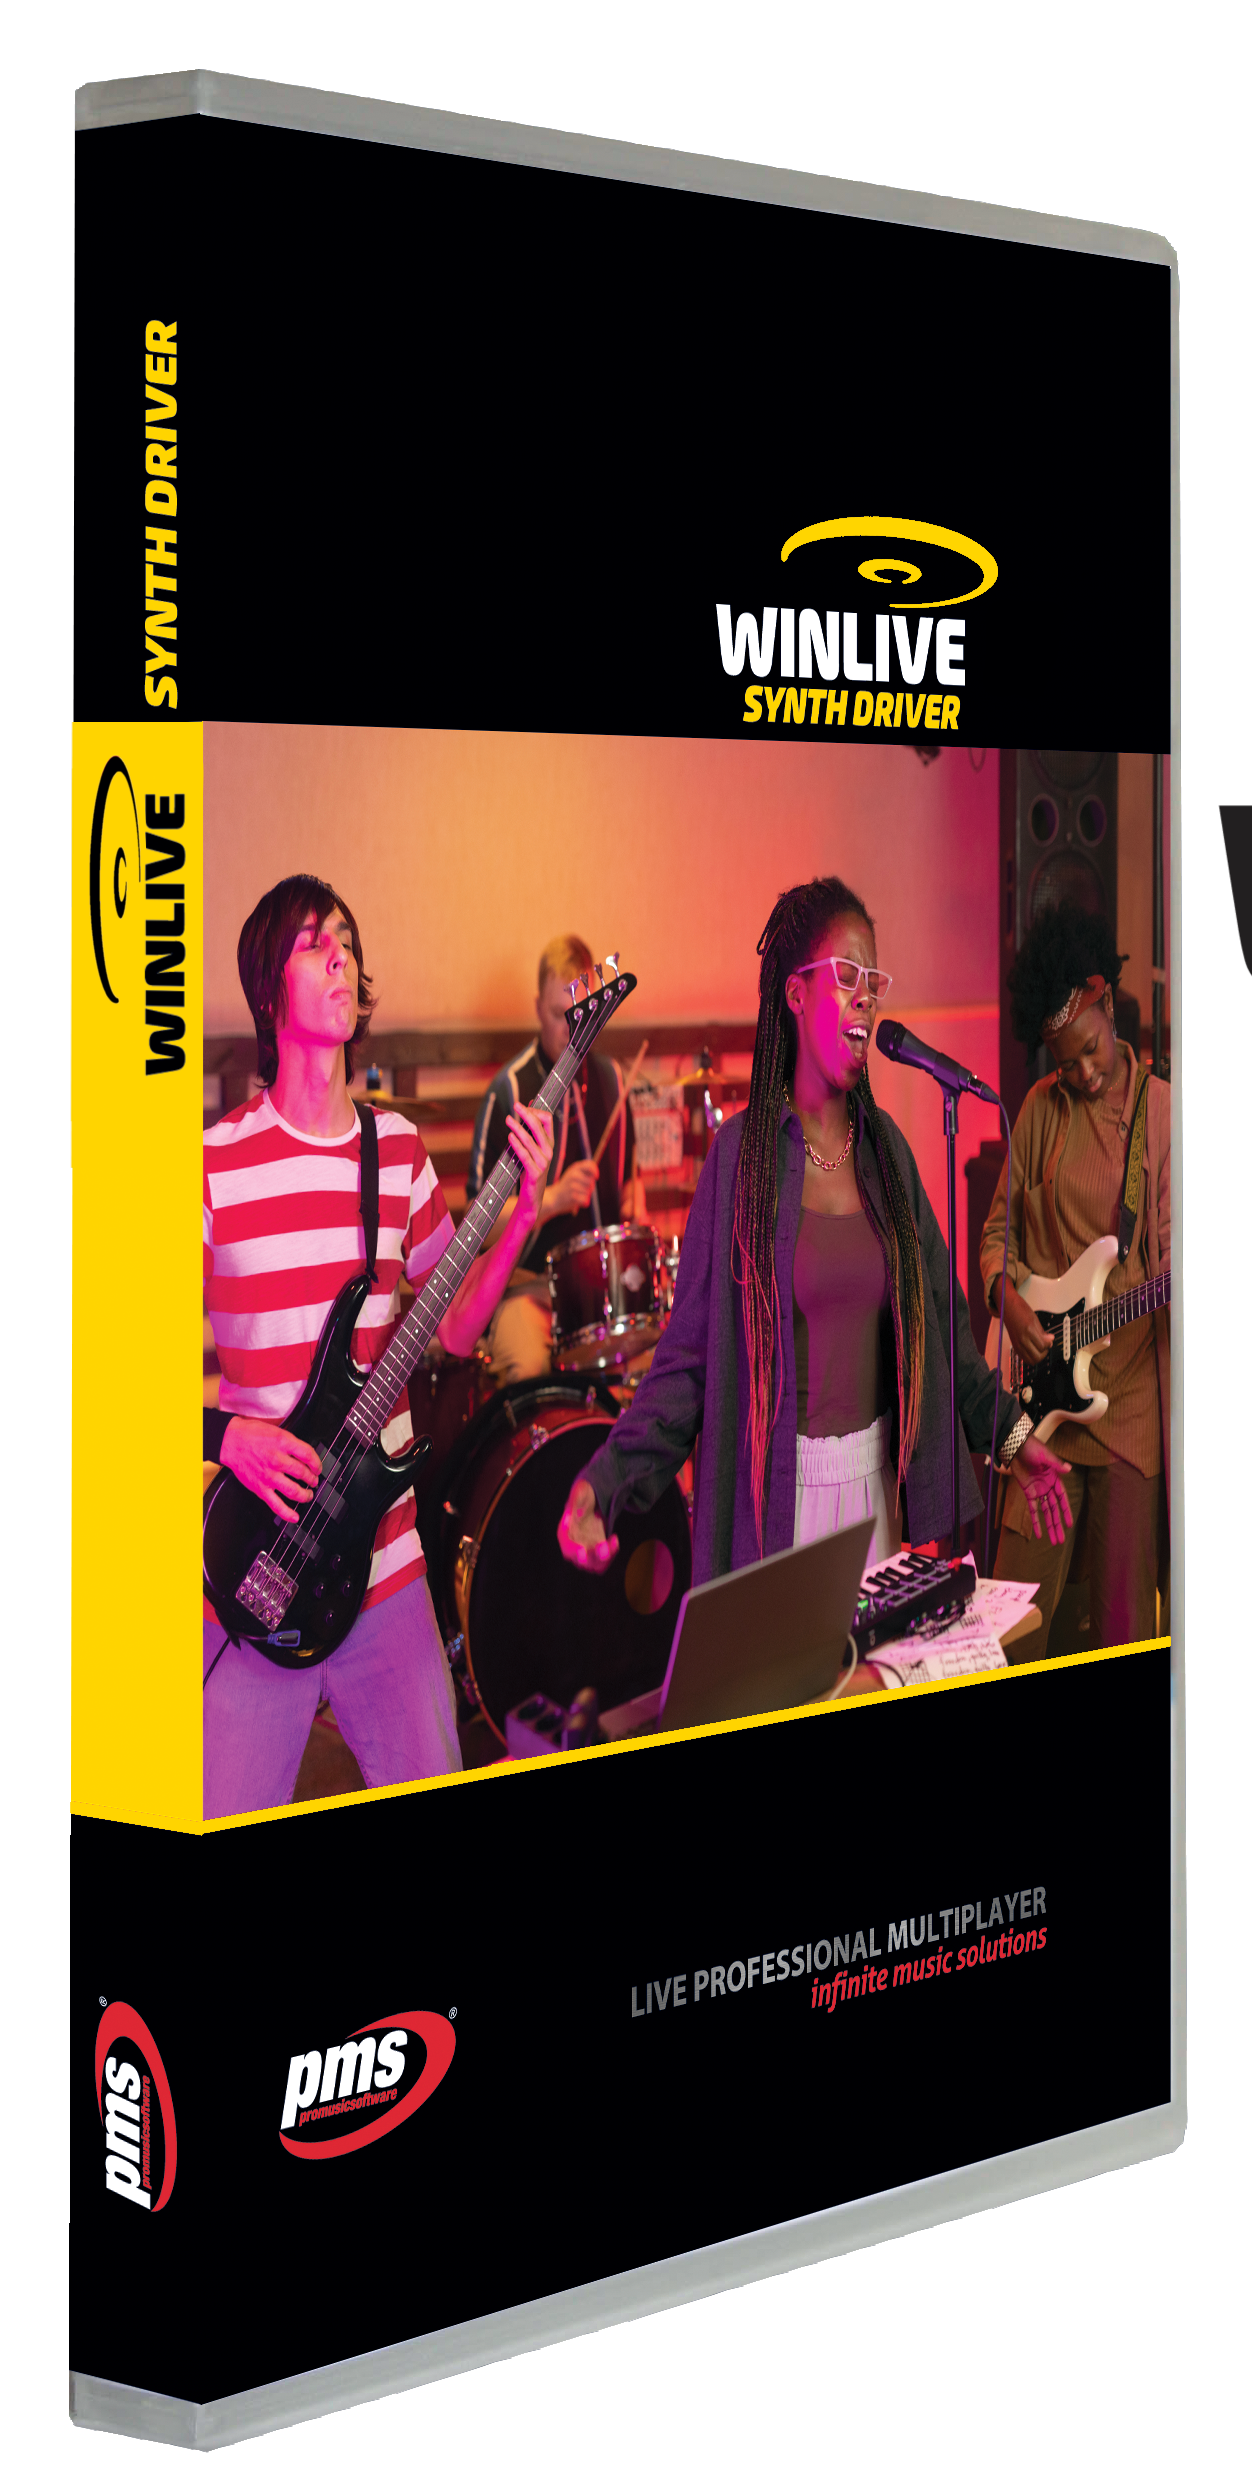 Winlive Synth Driver WSD 3.0